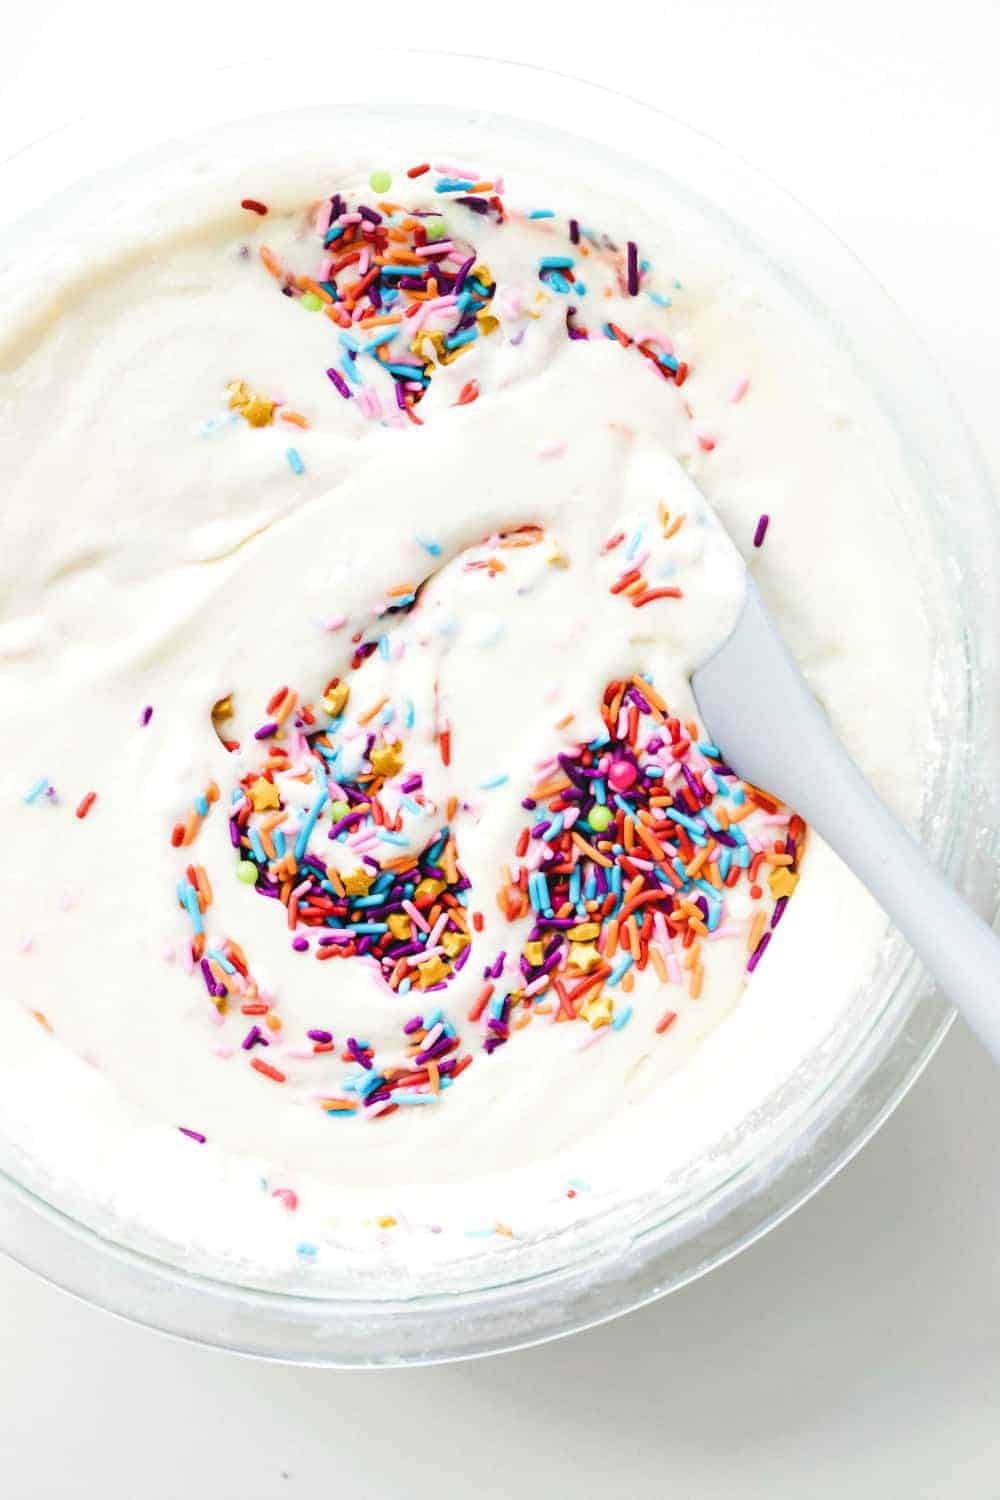 Spoon stirring sprinkles into cupcake batter for funfetti cupcakes